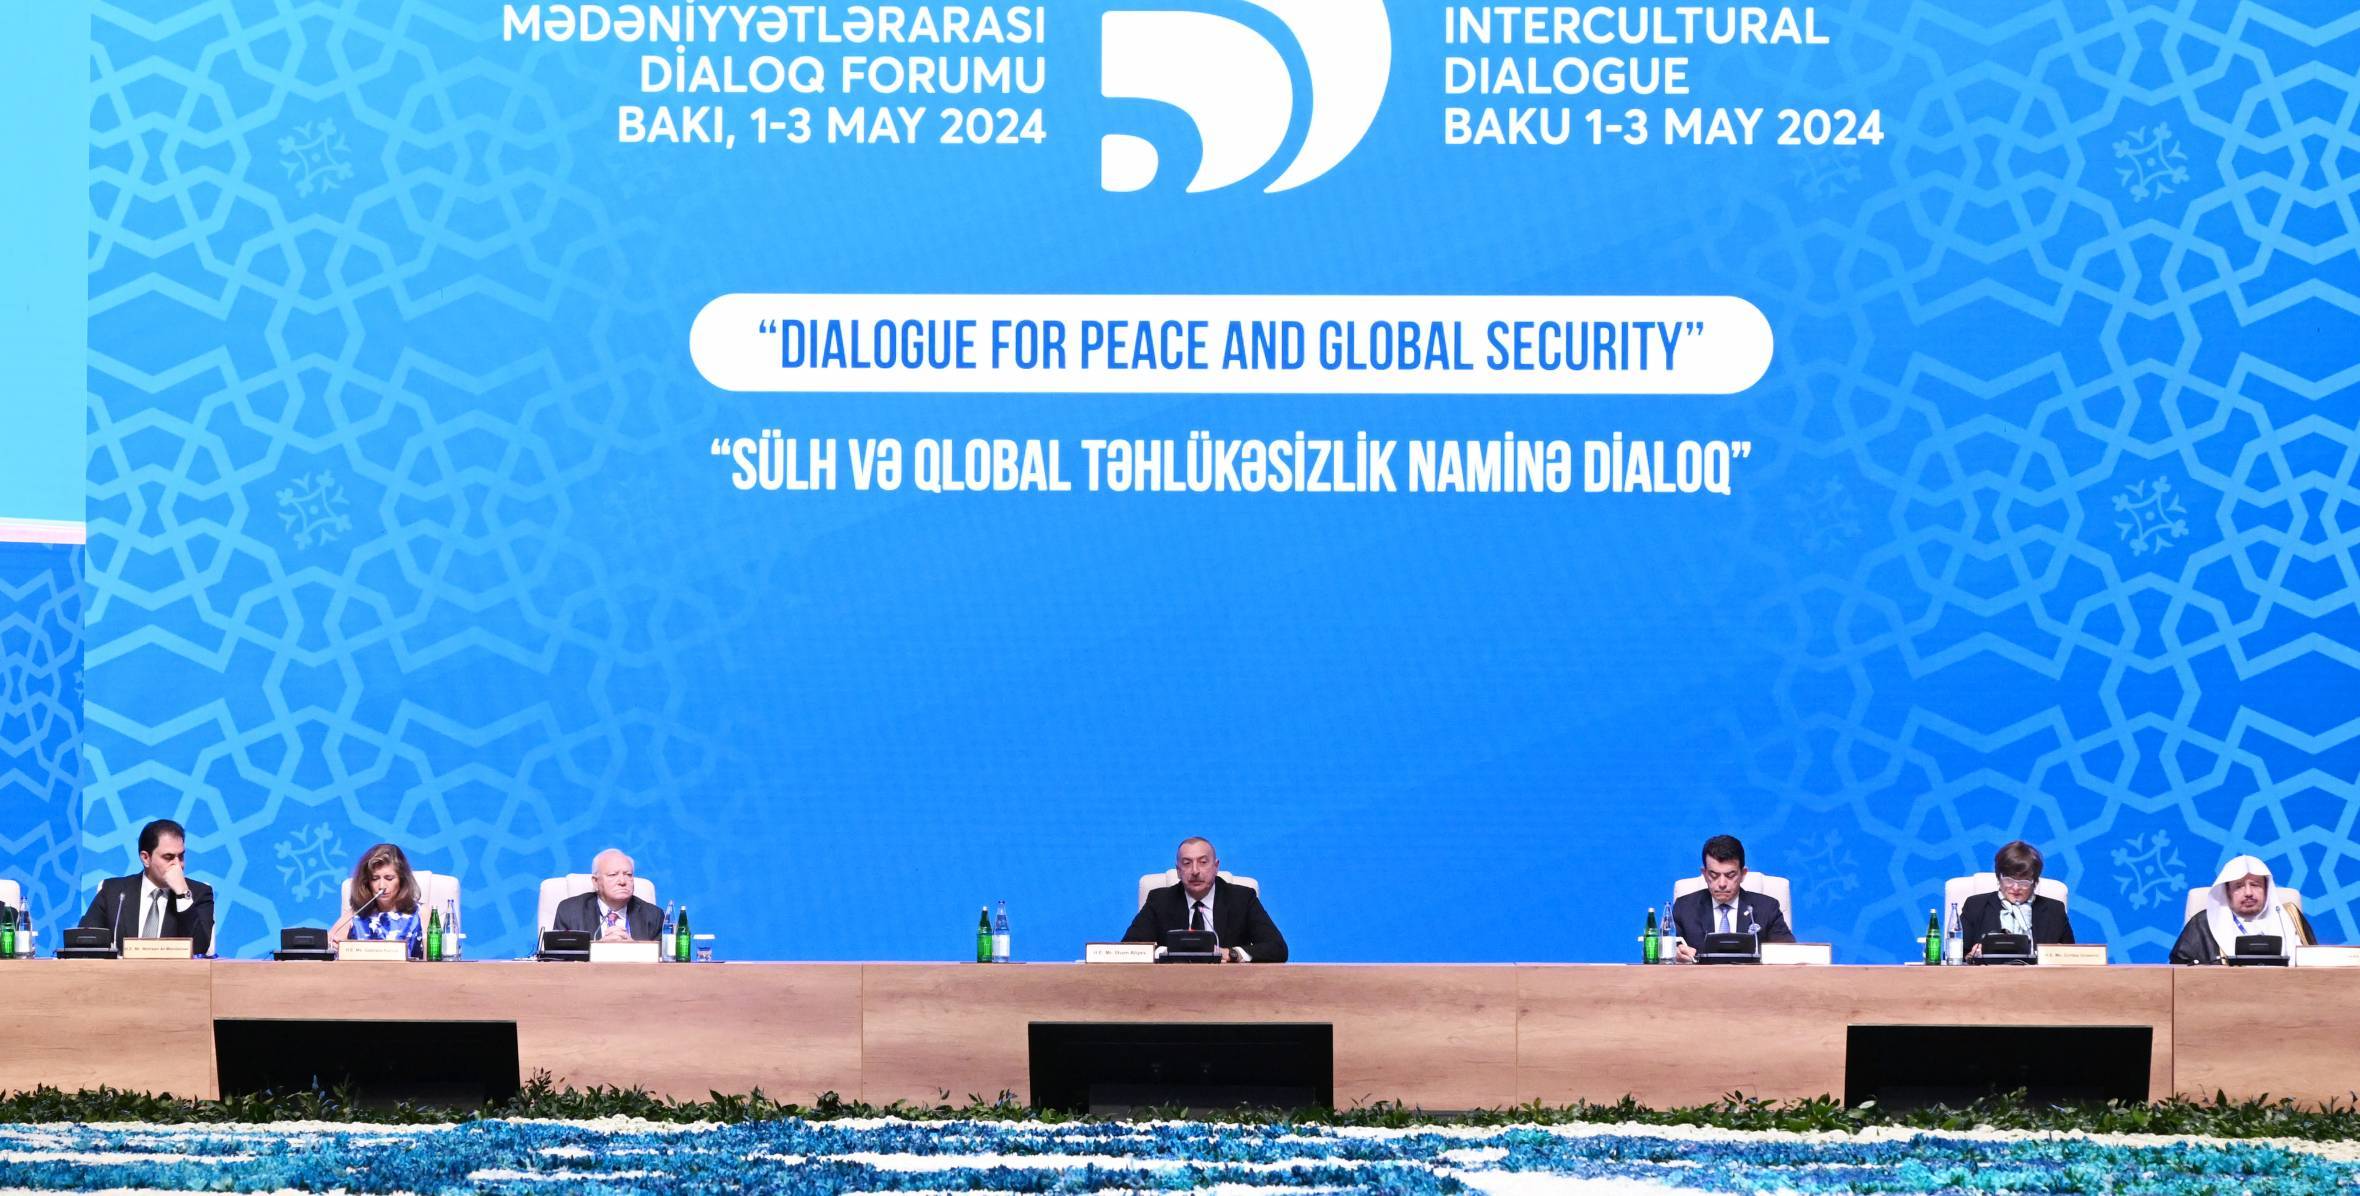 Speech by Ilham Aliyev at the opening of the 6th World Forum on Intercultural Dialogue in Baku